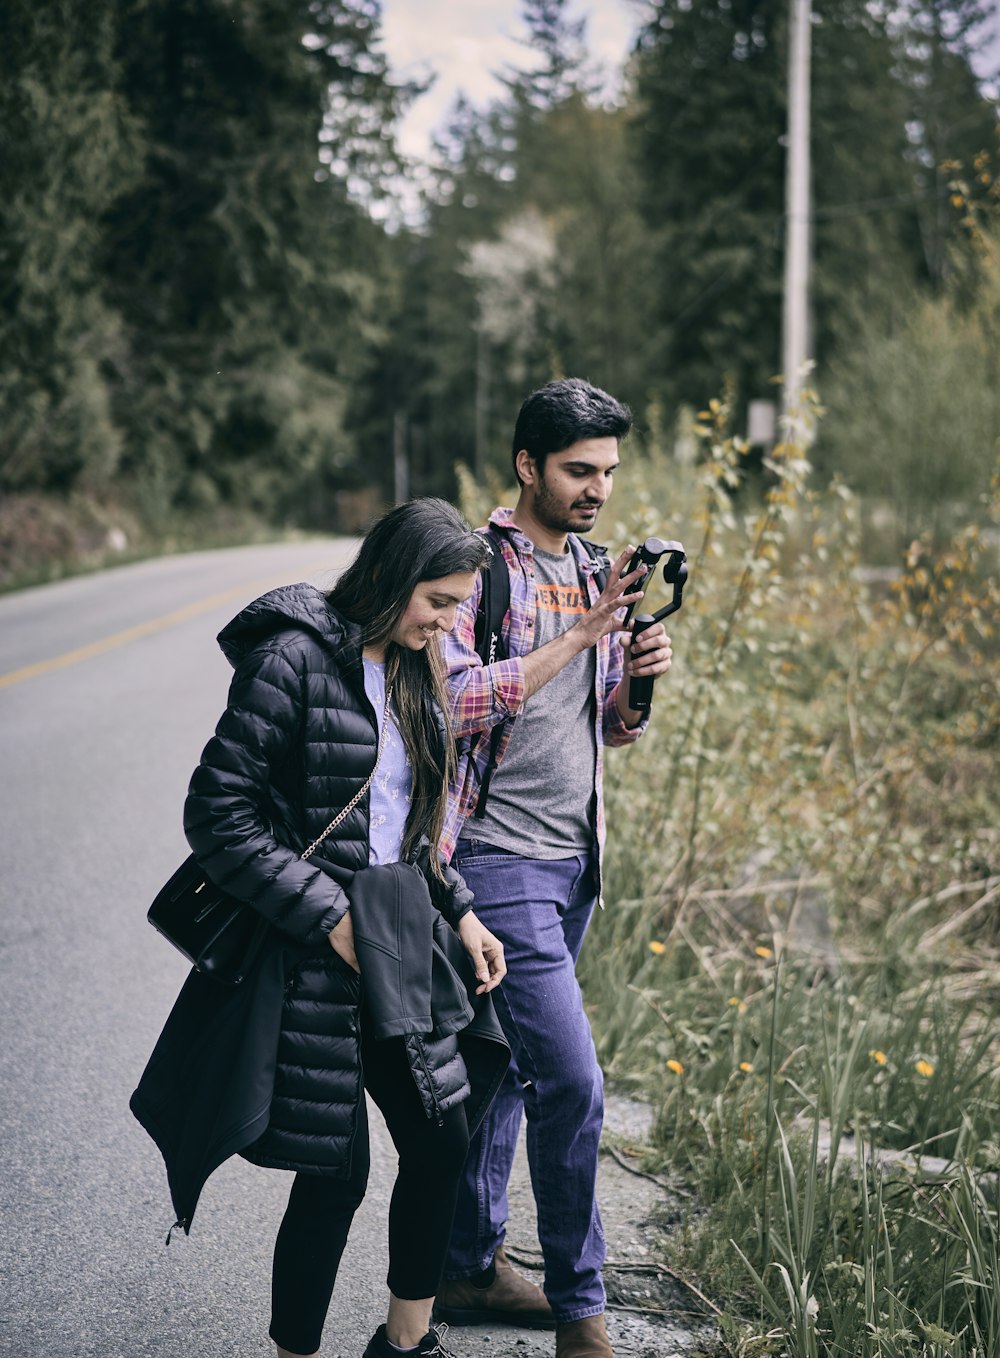 a man and woman taking a picture together on a road